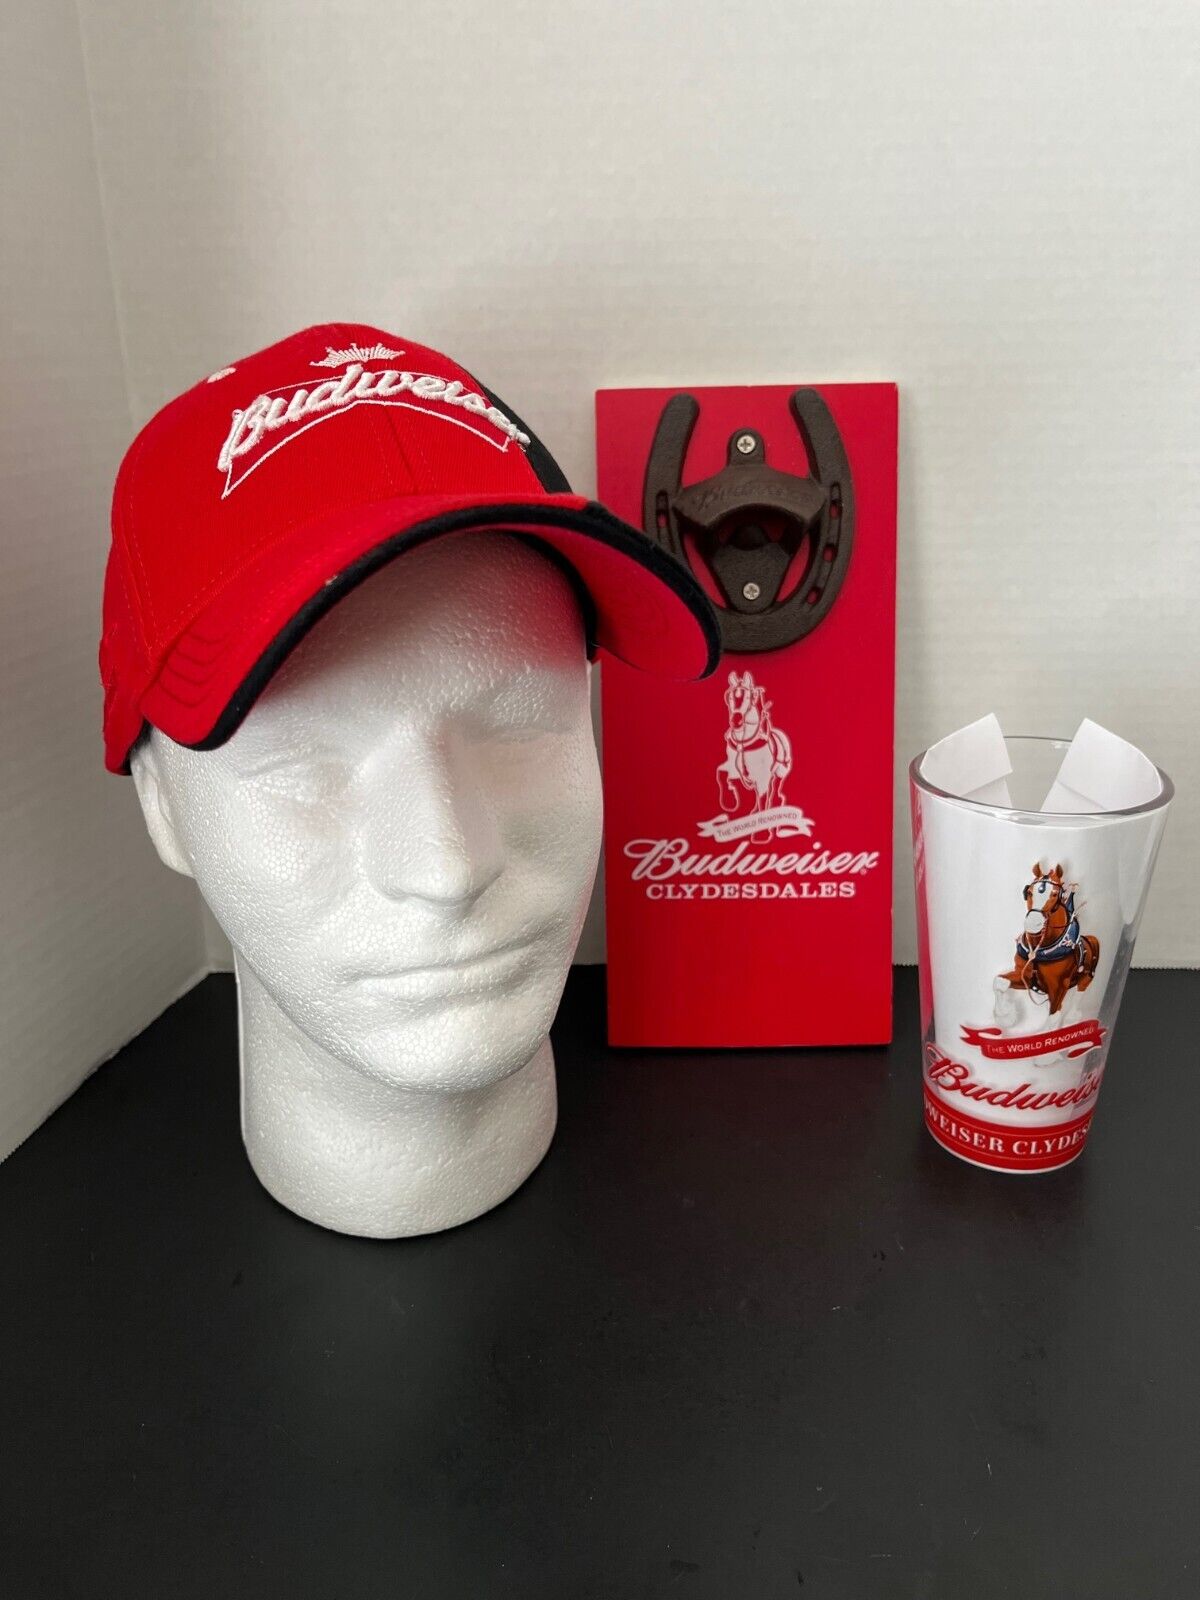 Budweiser Merchandise Bundle-Hat, Bottle opener and Bud Clydesdales glass.